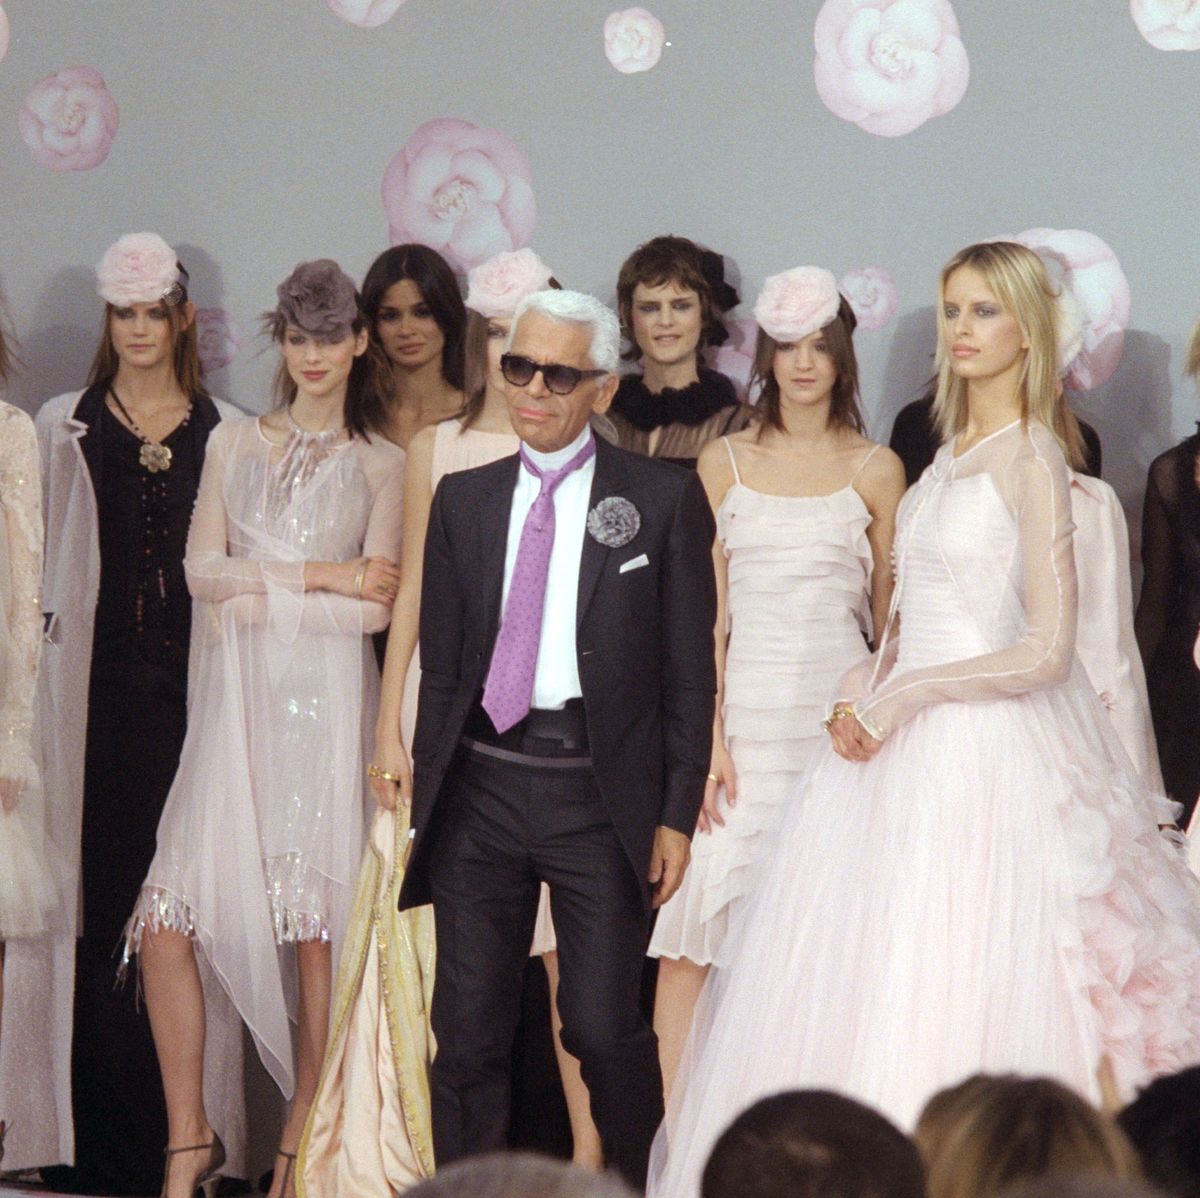 Chanel 2002 Spring/Summer 'Haute Couture' Fashion Show